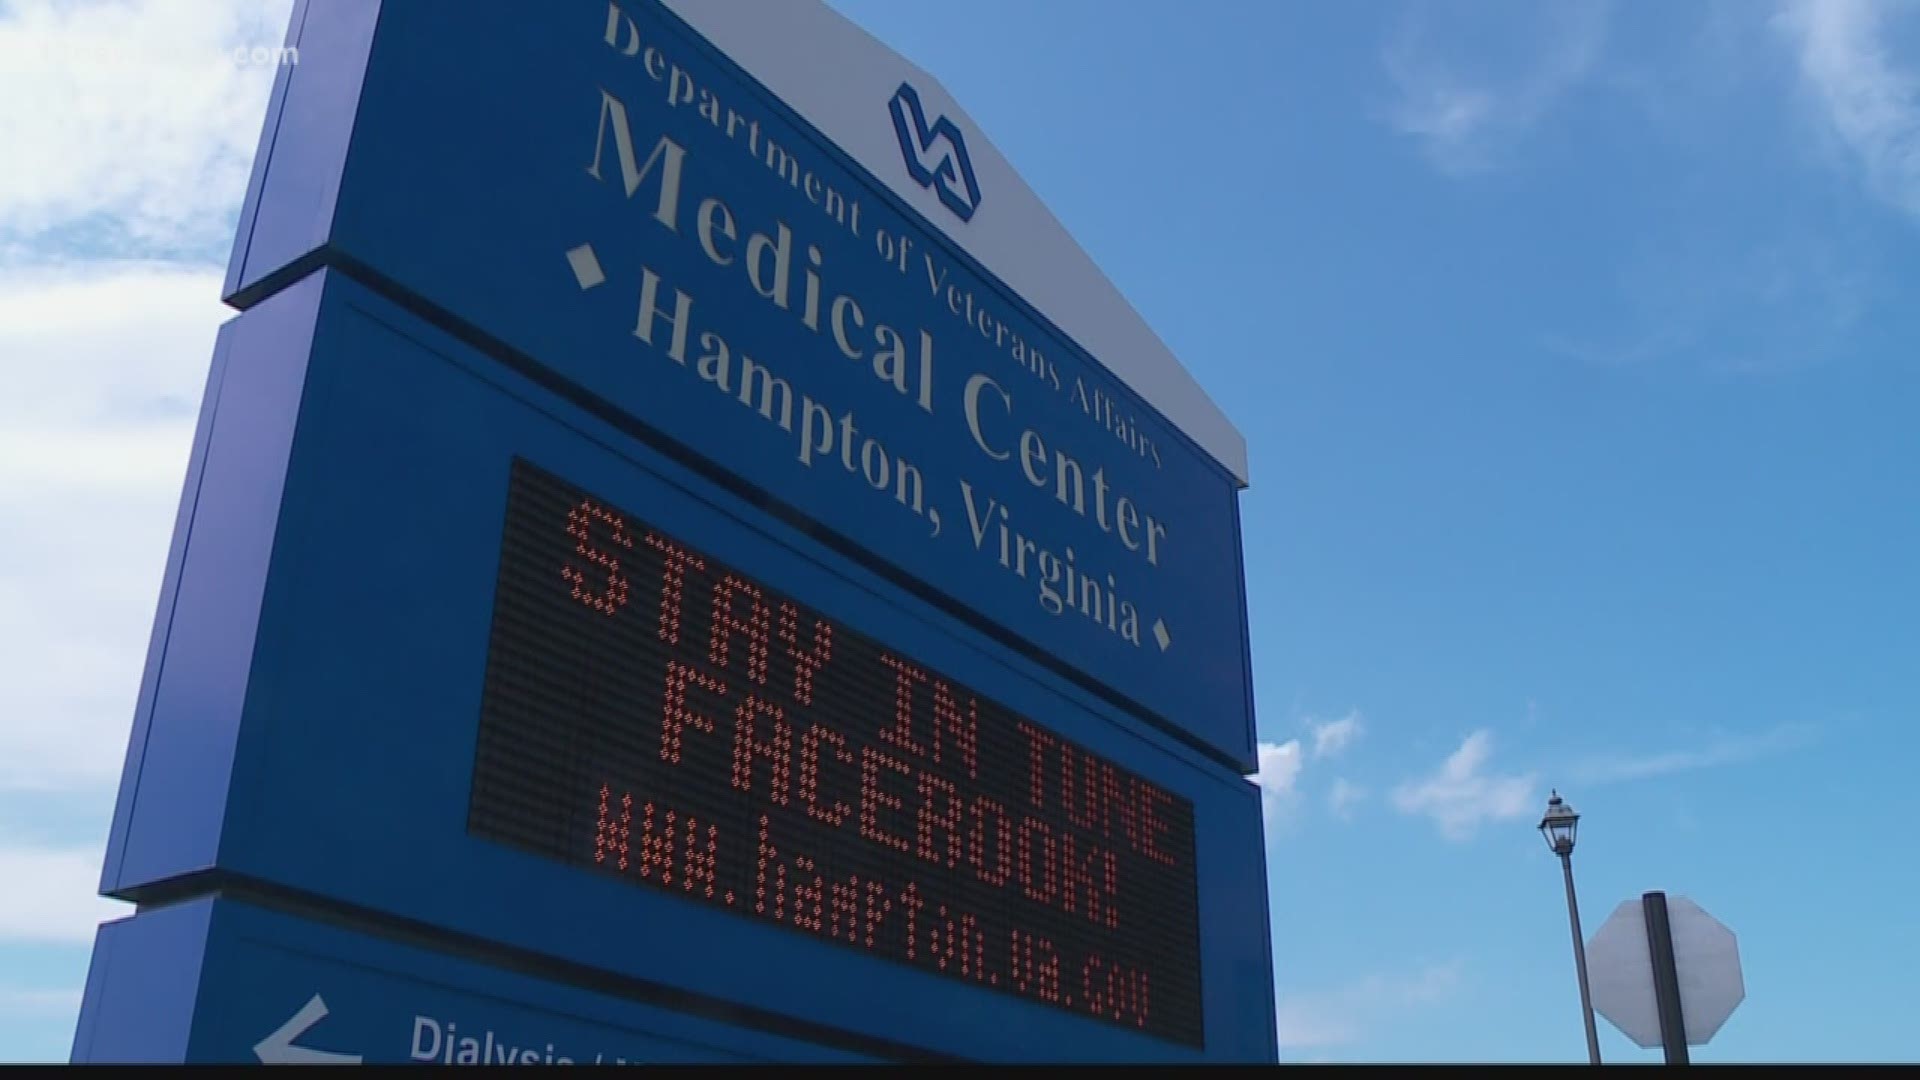 A much-needed dose of good news for the Hampton Veterans Affairs Medical Center.